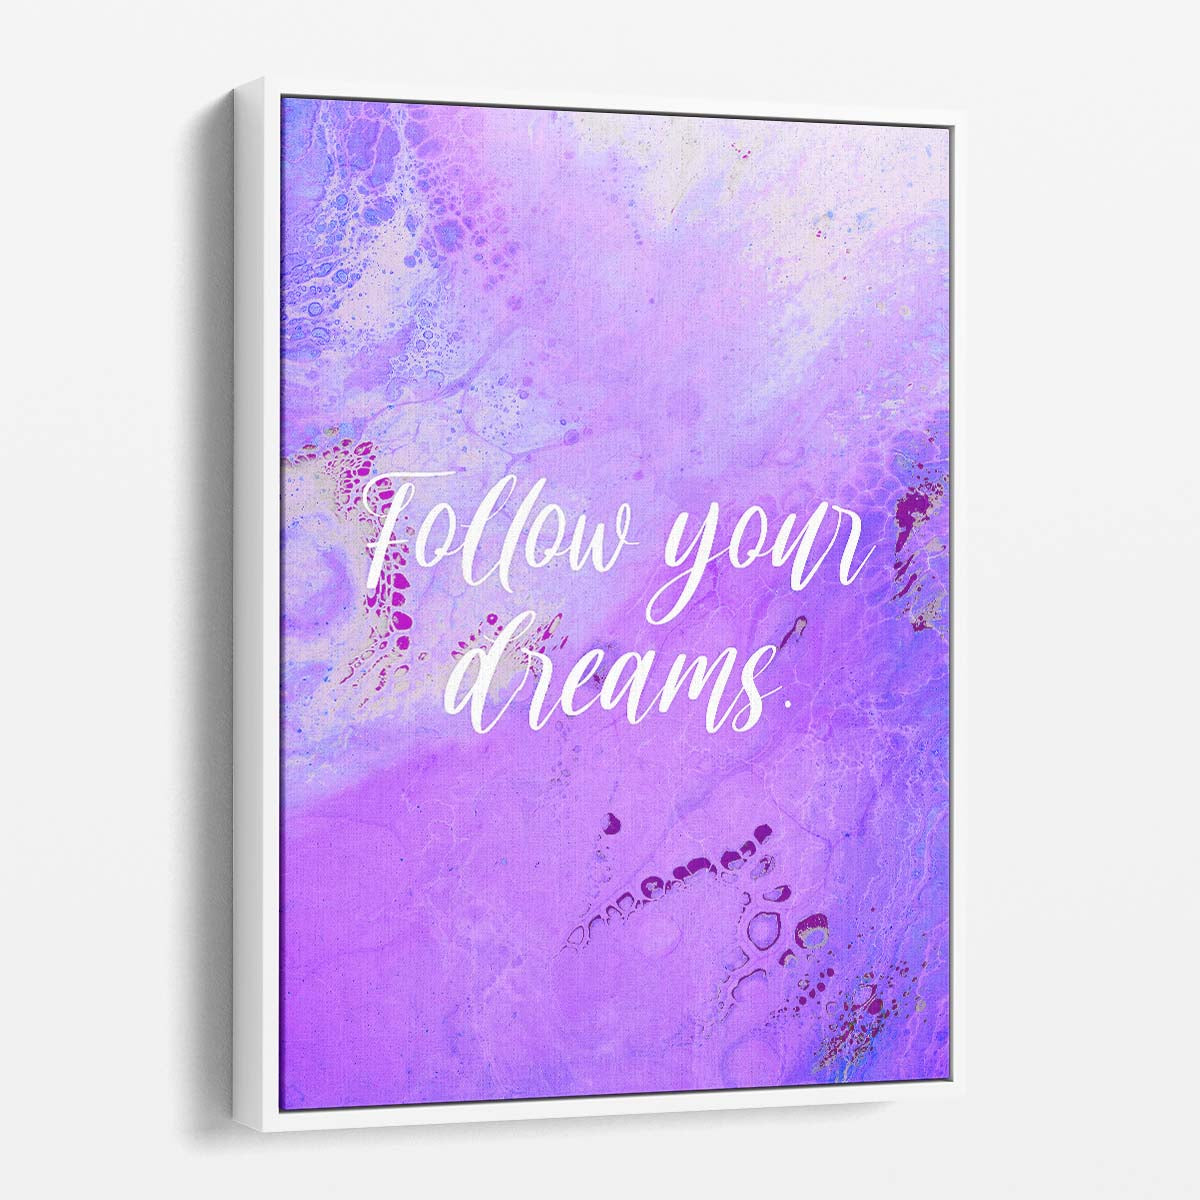 Follow Your Dreams Wall Art by Luxuriance Designs. Made in USA.